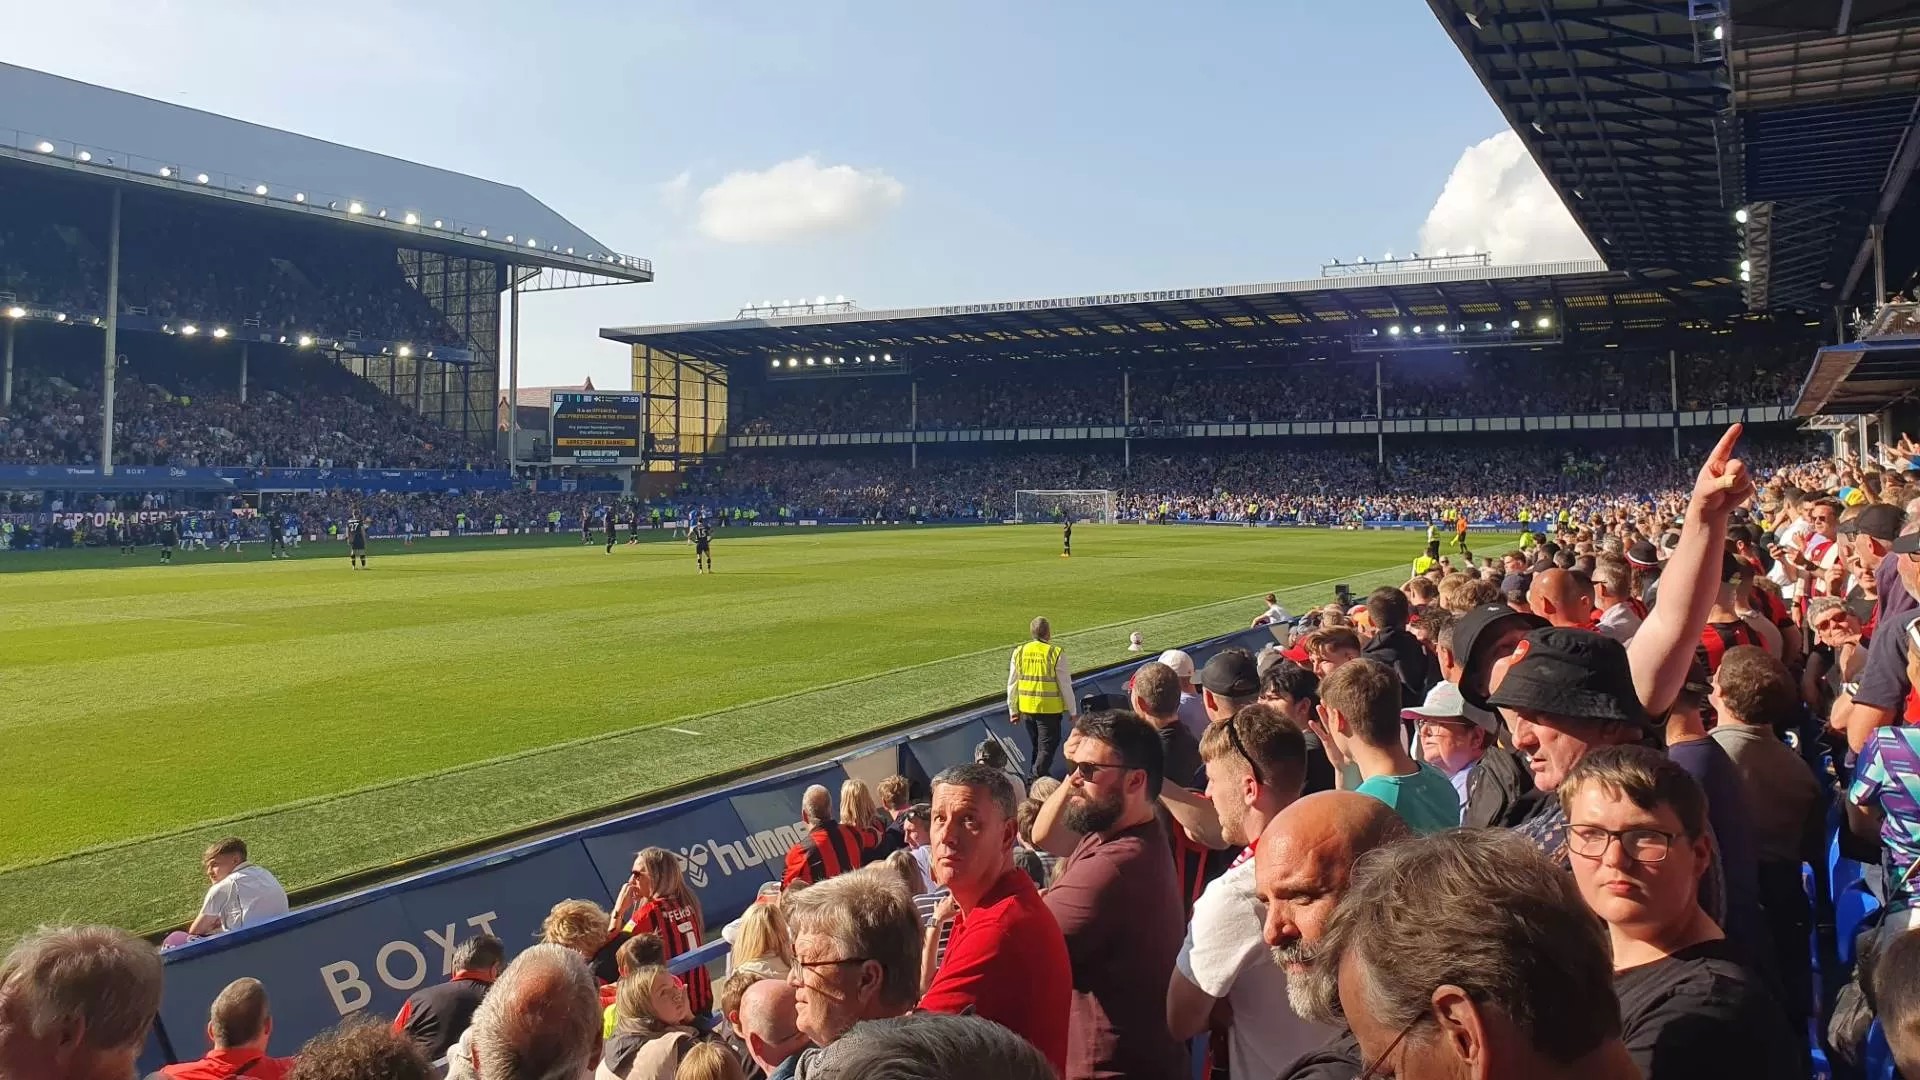 The story of Everton v Bournemouth by a Cherry born a Blue who wishes Dad was there too